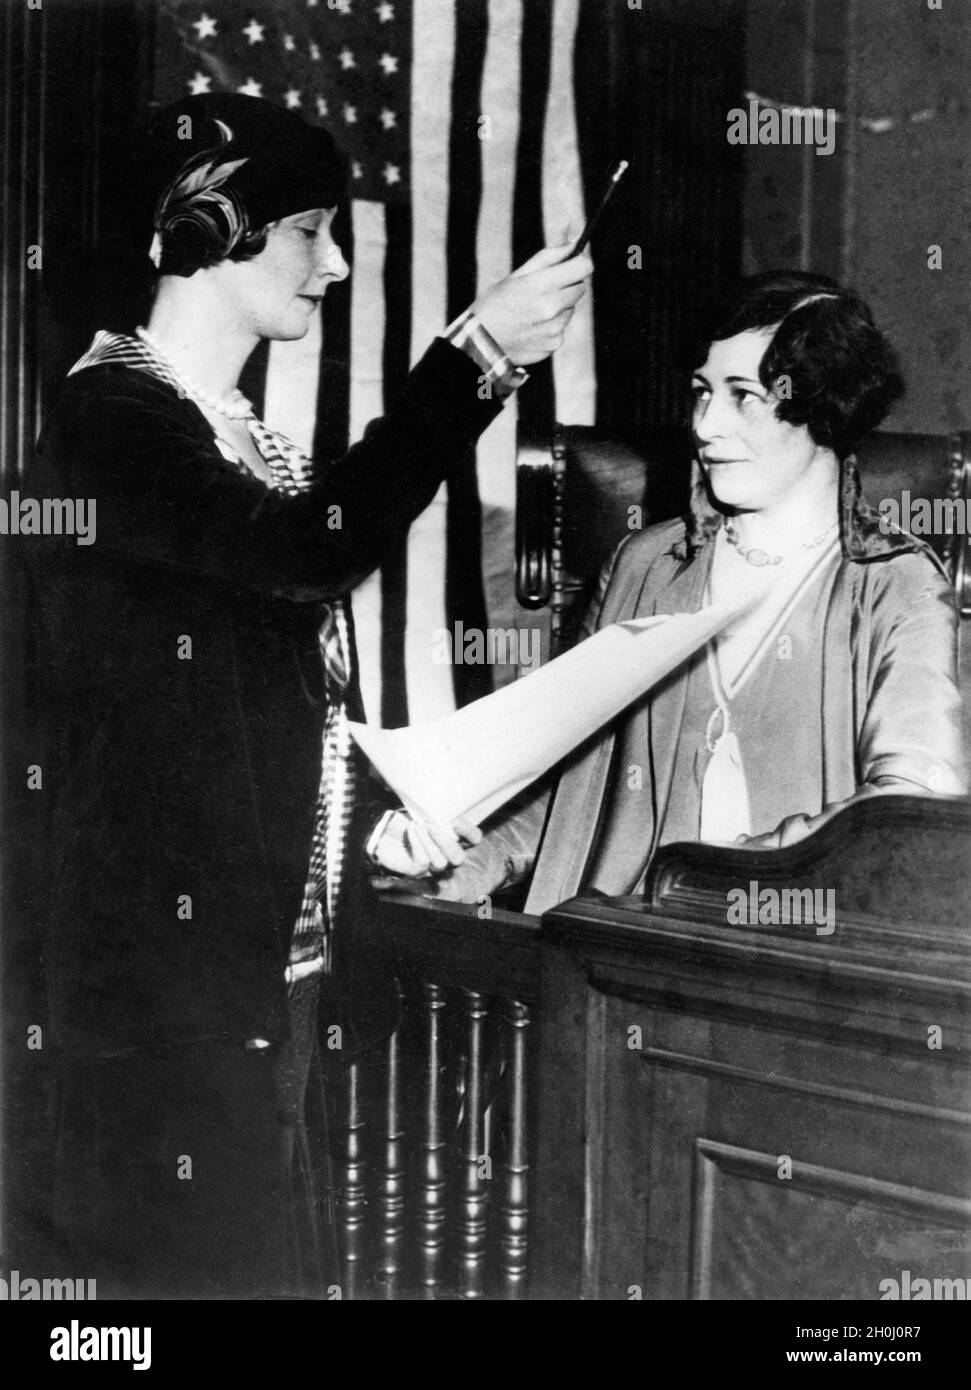 Judge Theresa Meikle (right) with Deputy District Attorney Edith Wilson (left) in the courtroom of the San Francisco District Court in the U.S. state of California. [automated translation] Stock Photo